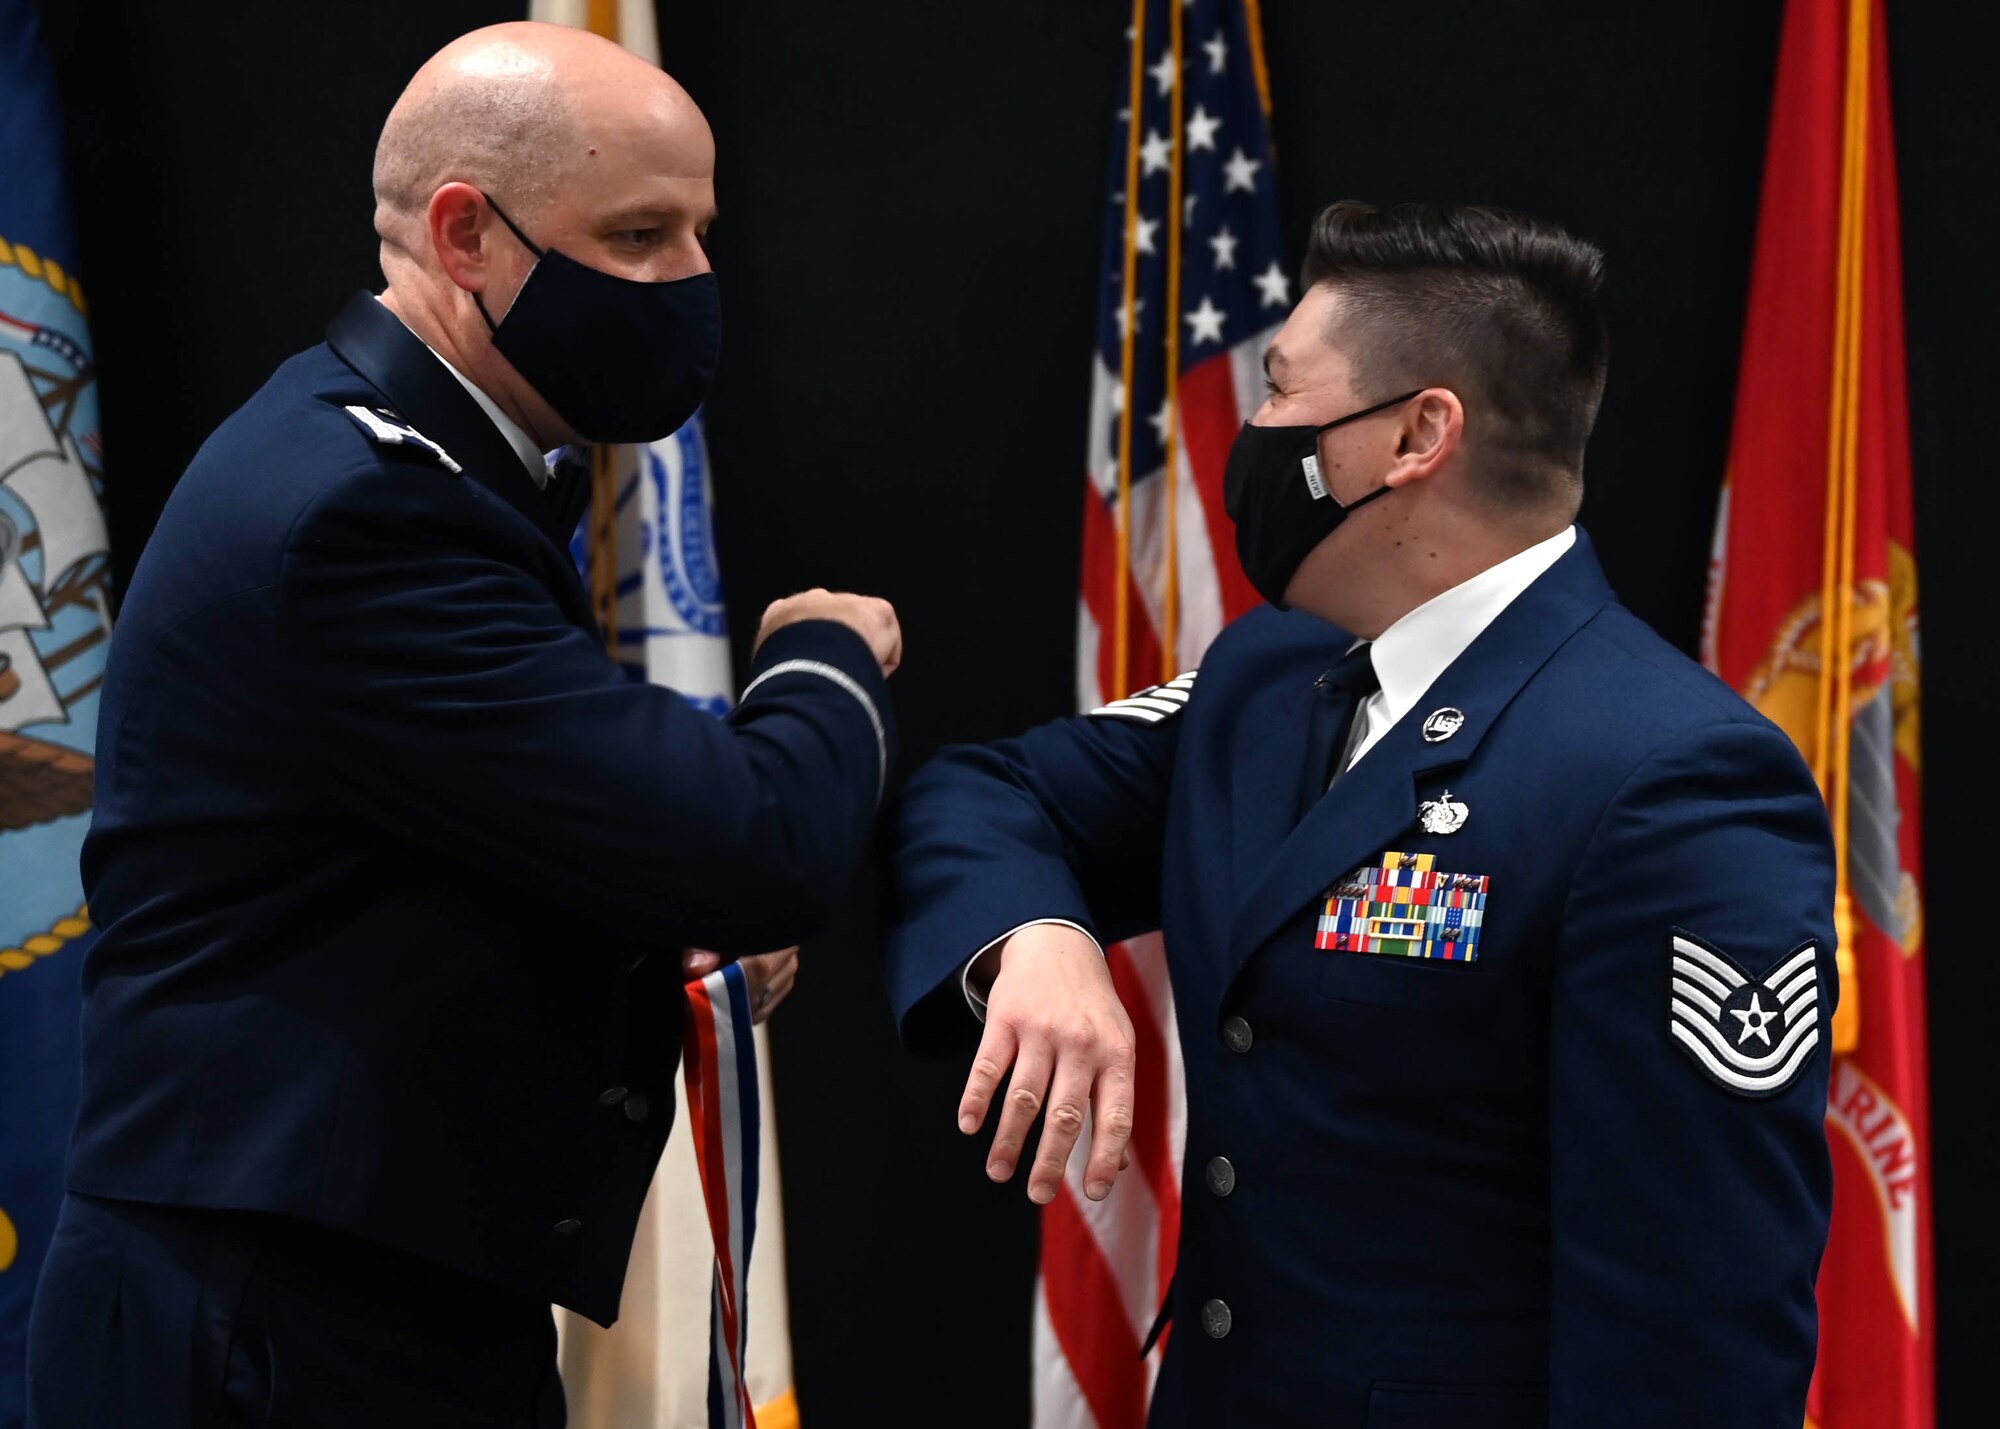 Col. Matthew Reilman elbow bumps an inductee during the Senior Noncommissioned Officer Induction Ceremony.